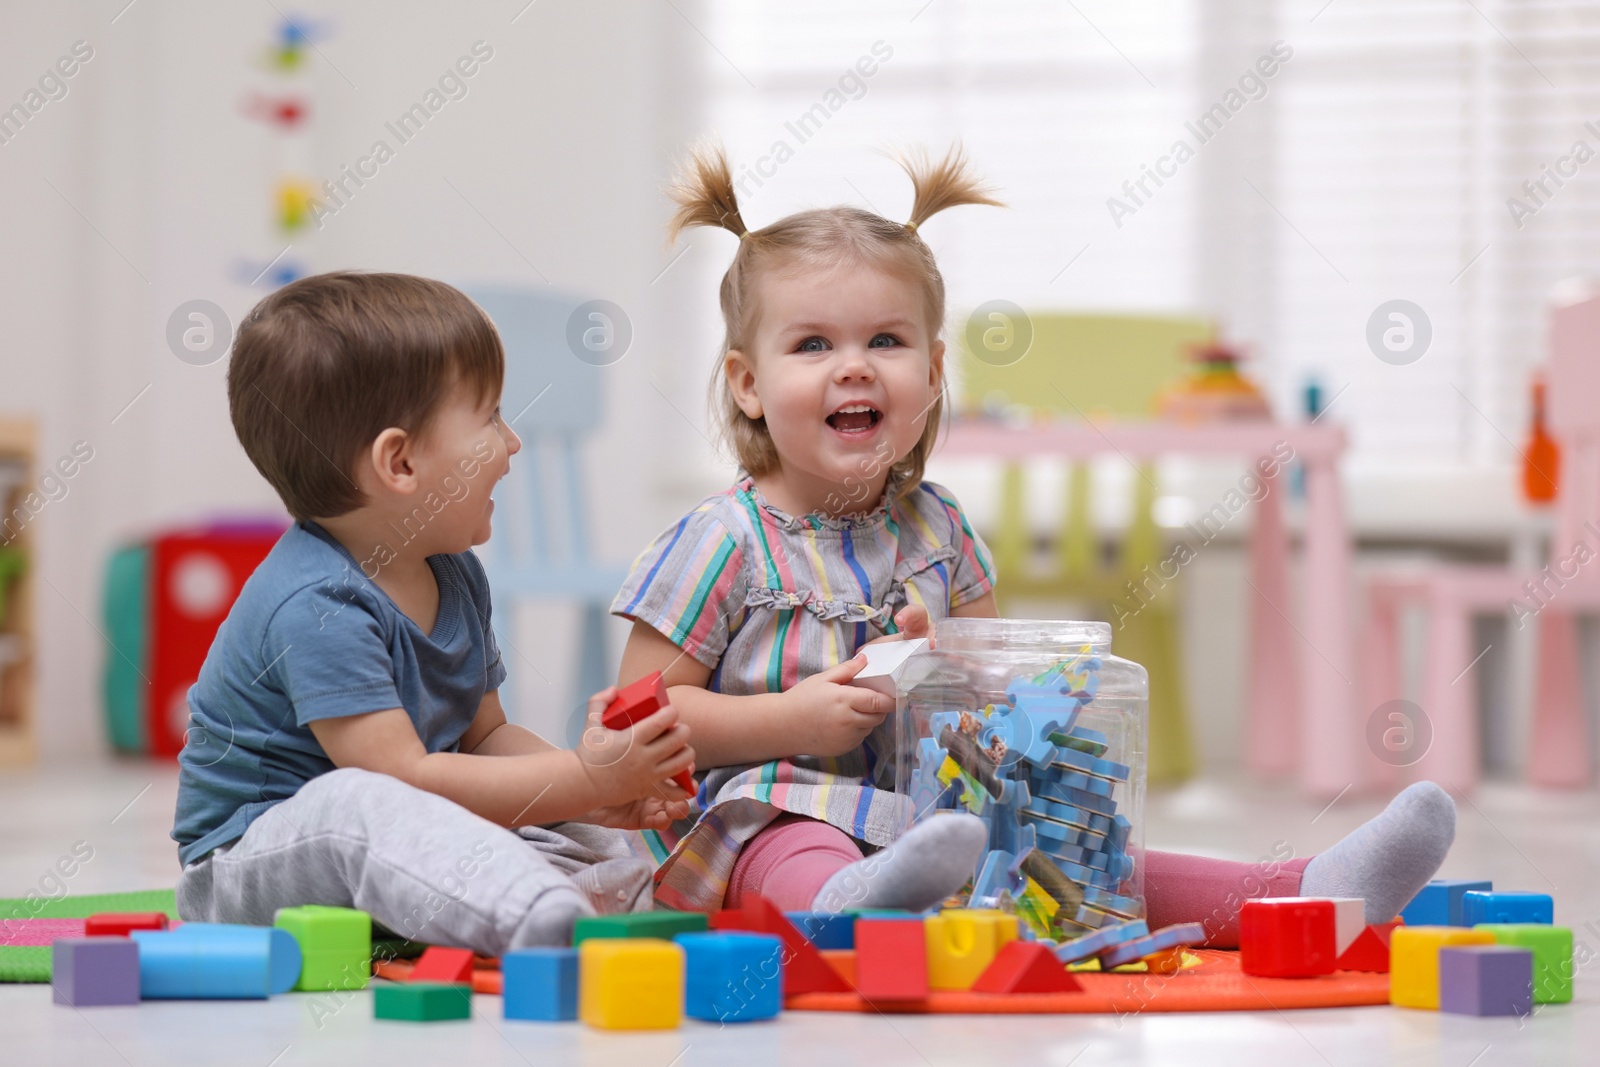 Photo of Cute little children playing together on floor at home